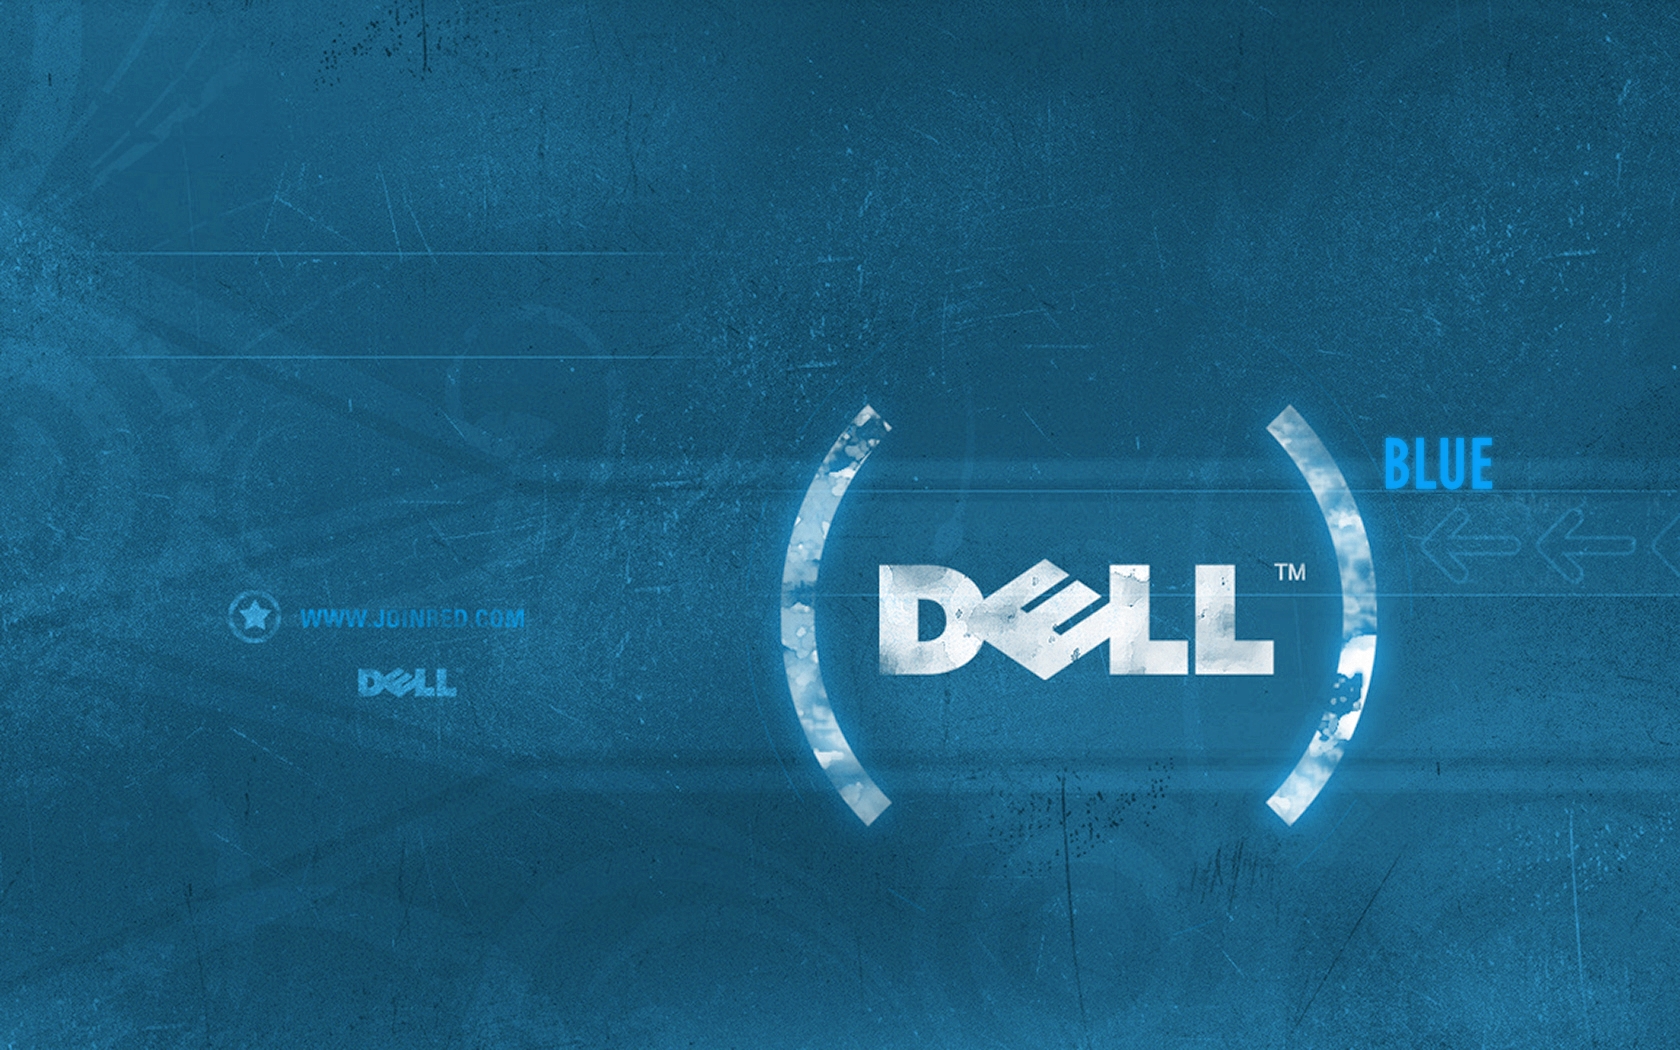 HD Dell Background Wallpaper Image For